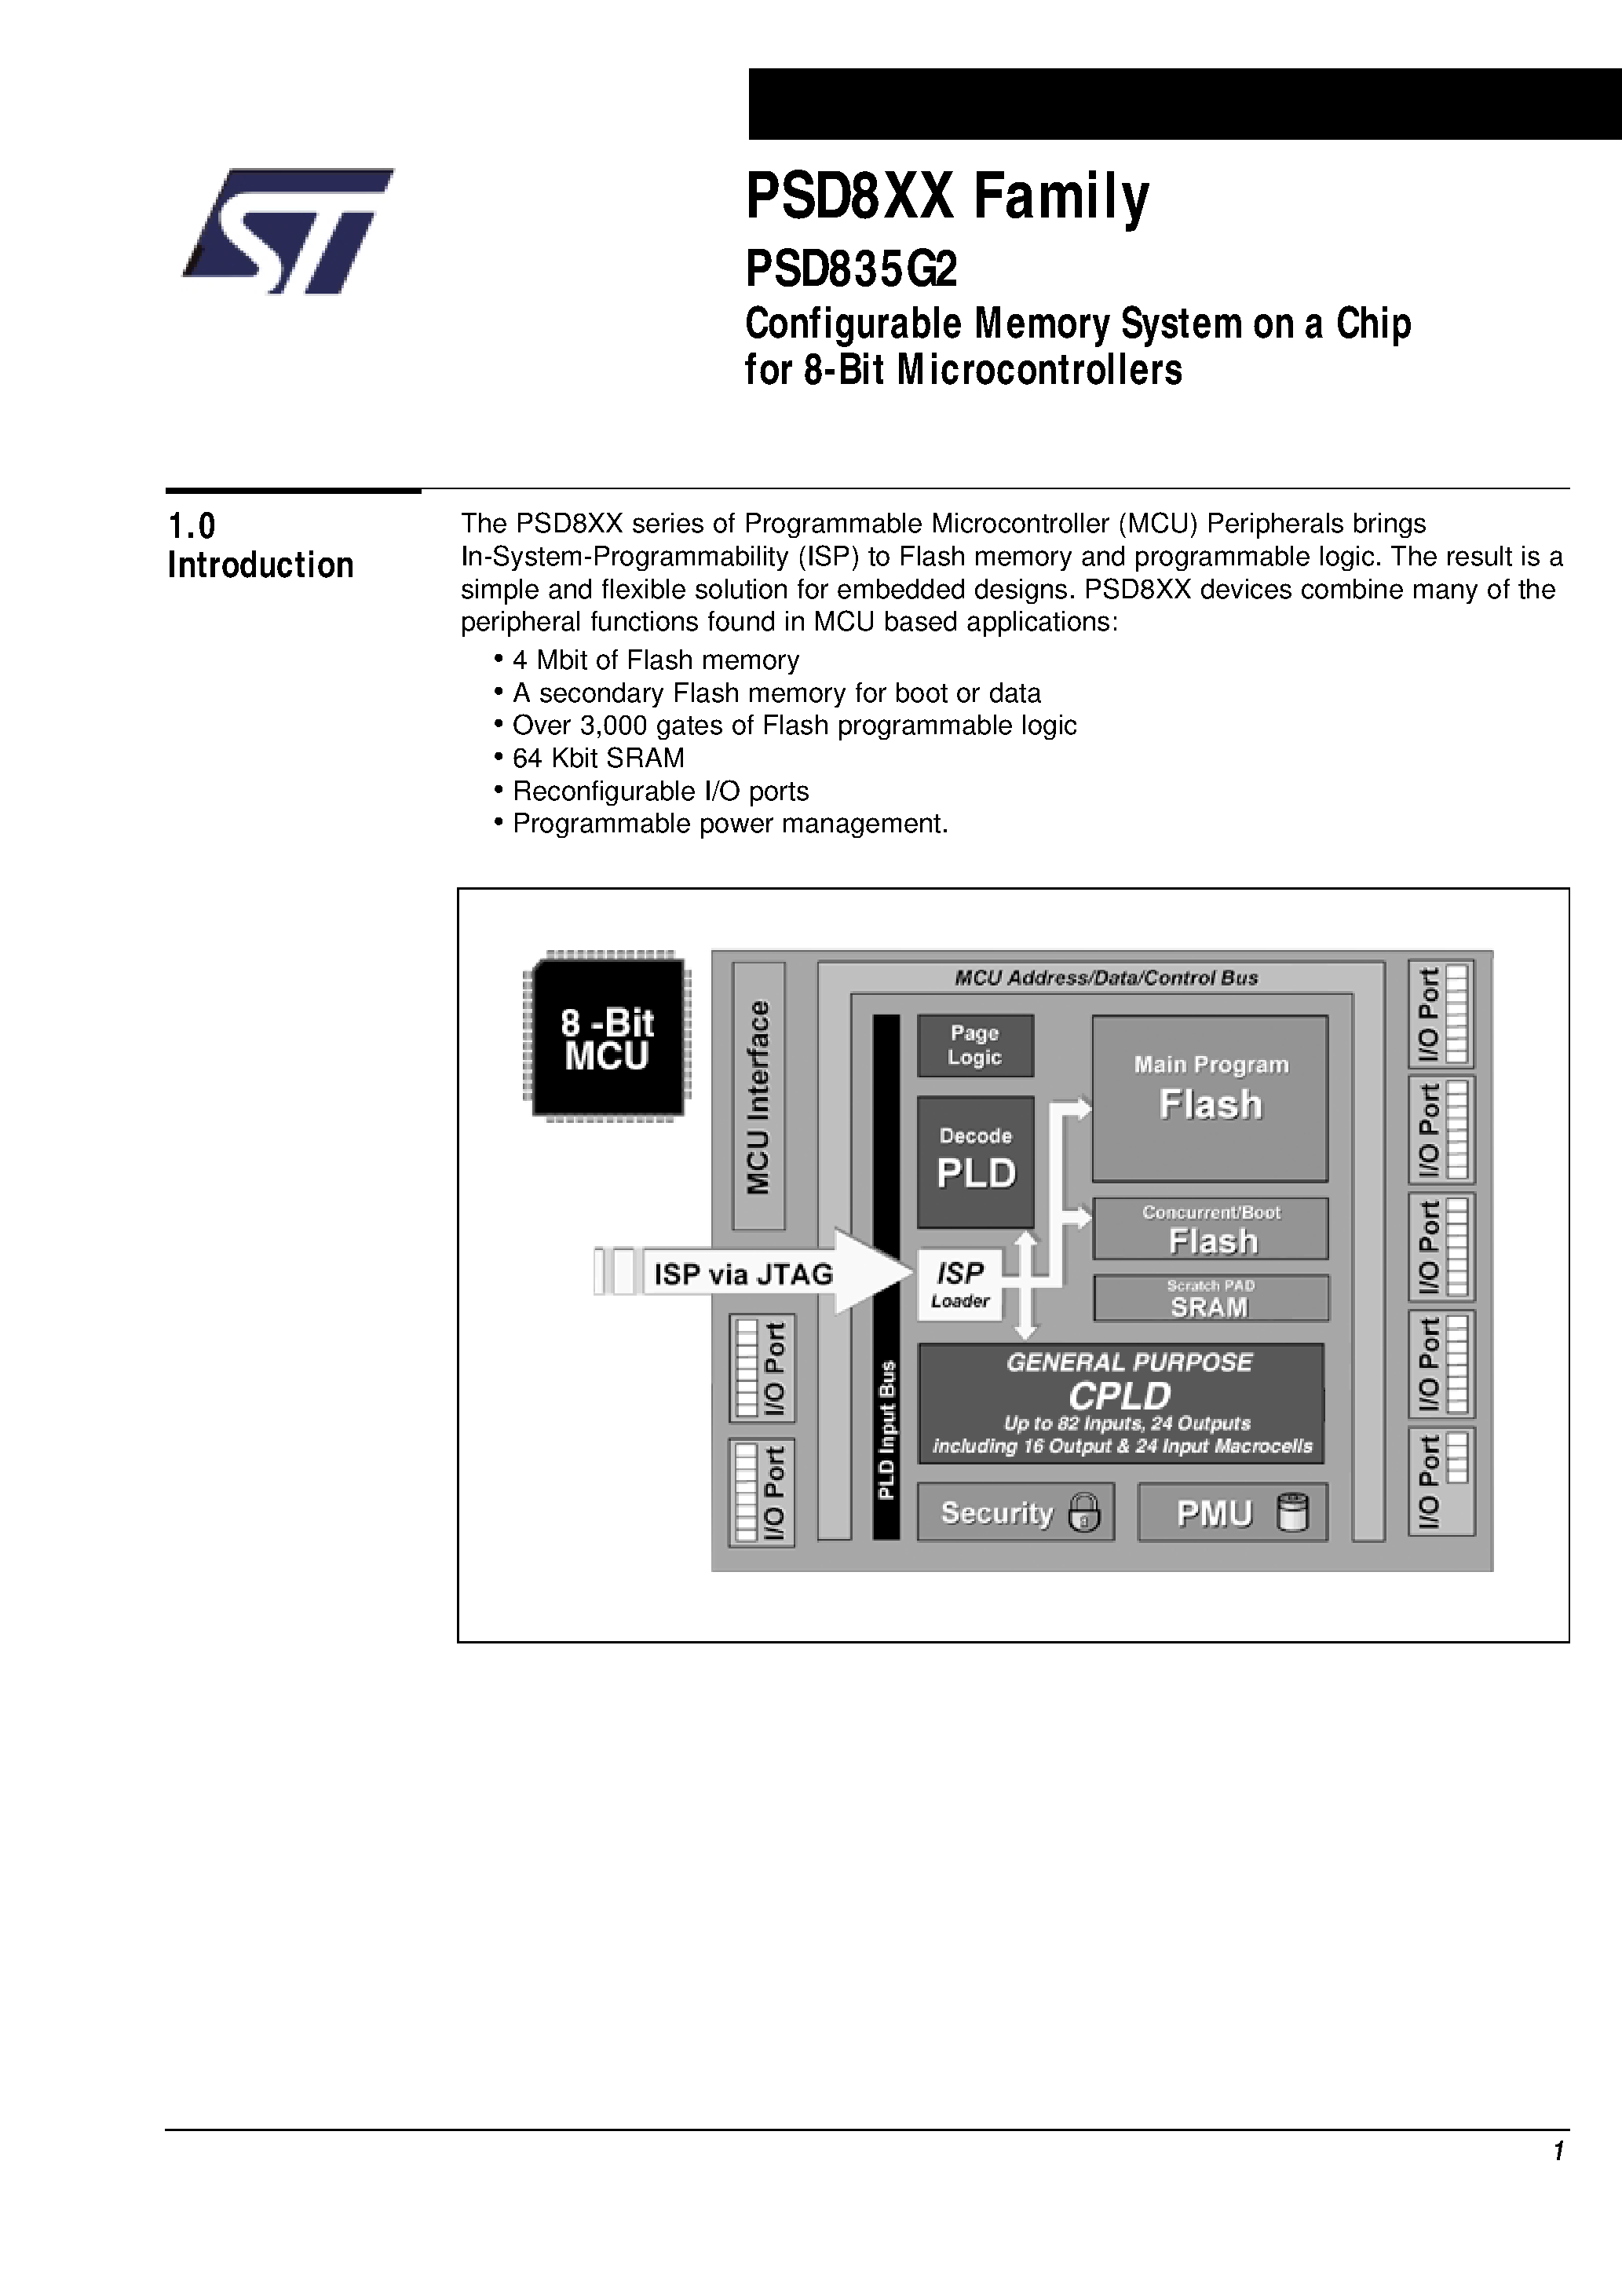 Datasheet PSD835F2-A-15MI - Configurable Memory System on a Chip for 8-Bit Microcontrollers page 2